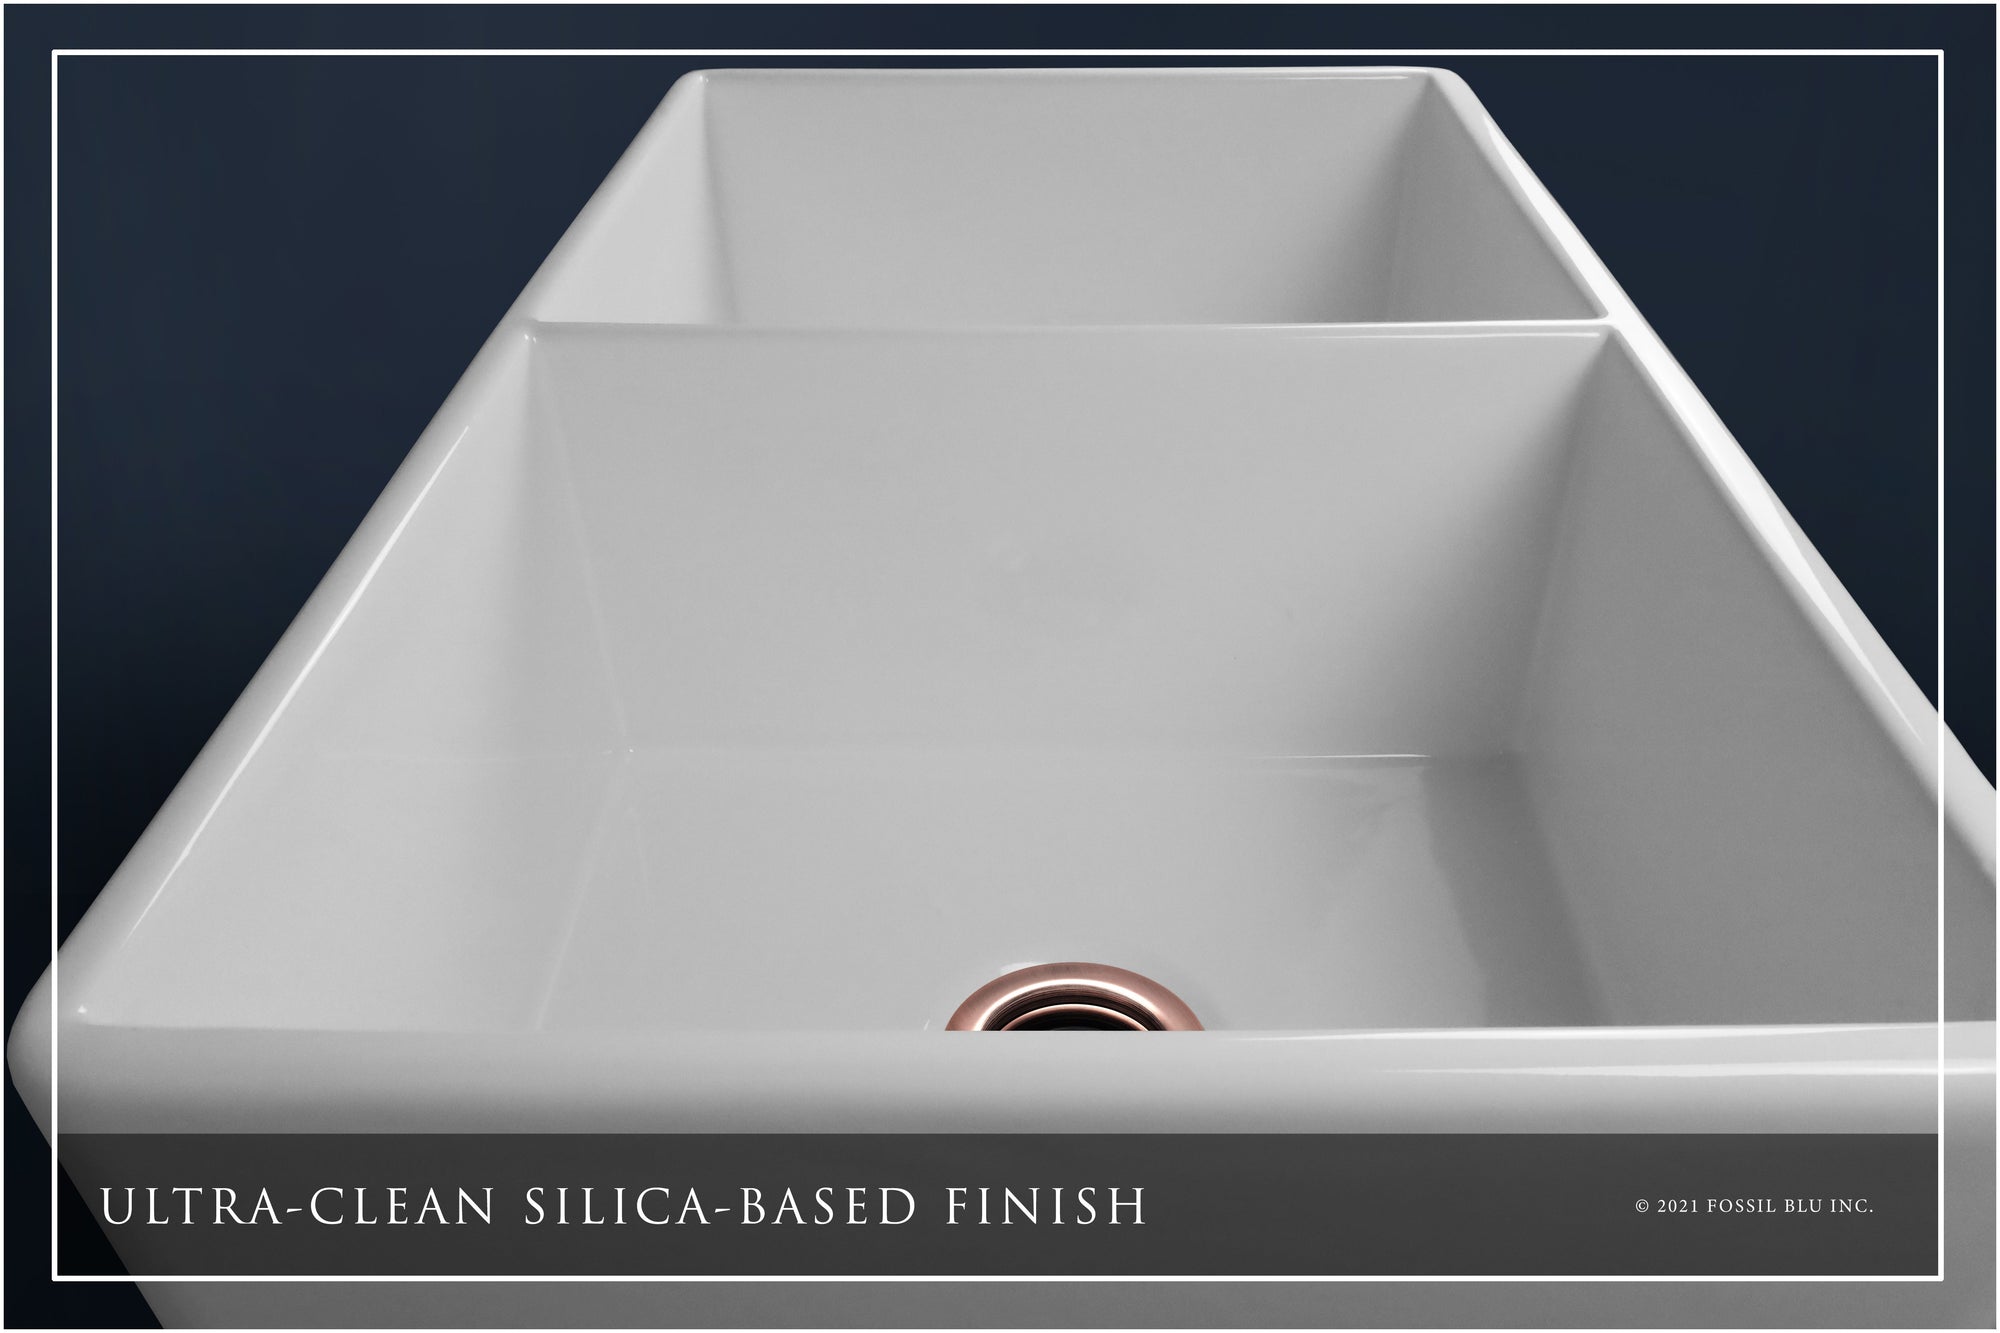 FSW1006AC LUXURY 33-INCH SOLID FIRECLAY FARMHOUSE SINK IN WHITE, ANTIQUE COPPER ACCS, FLUTED FRONT